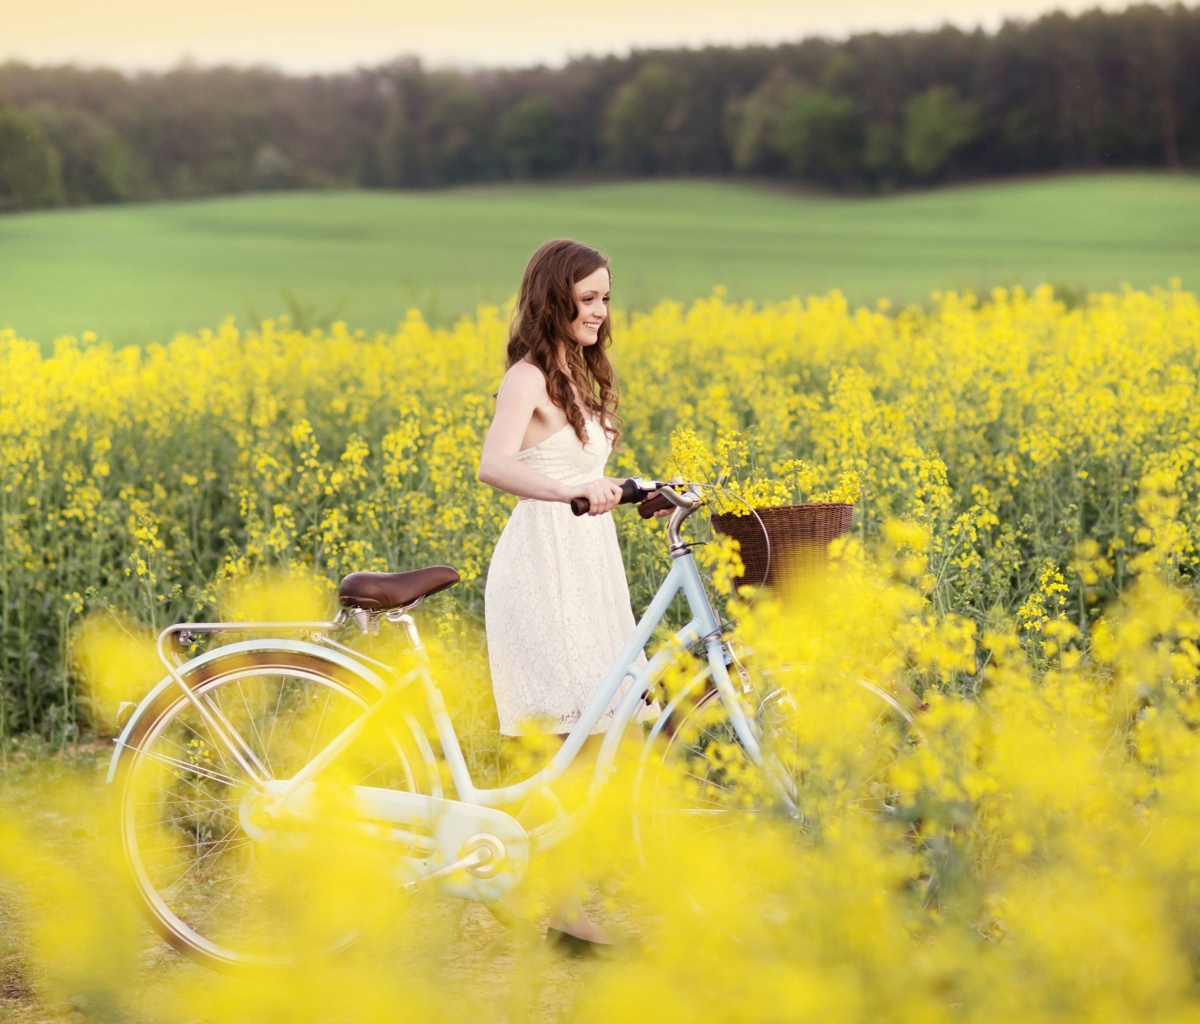 Girl With Bicycle In Yellow Field wallpaper 1200x1024